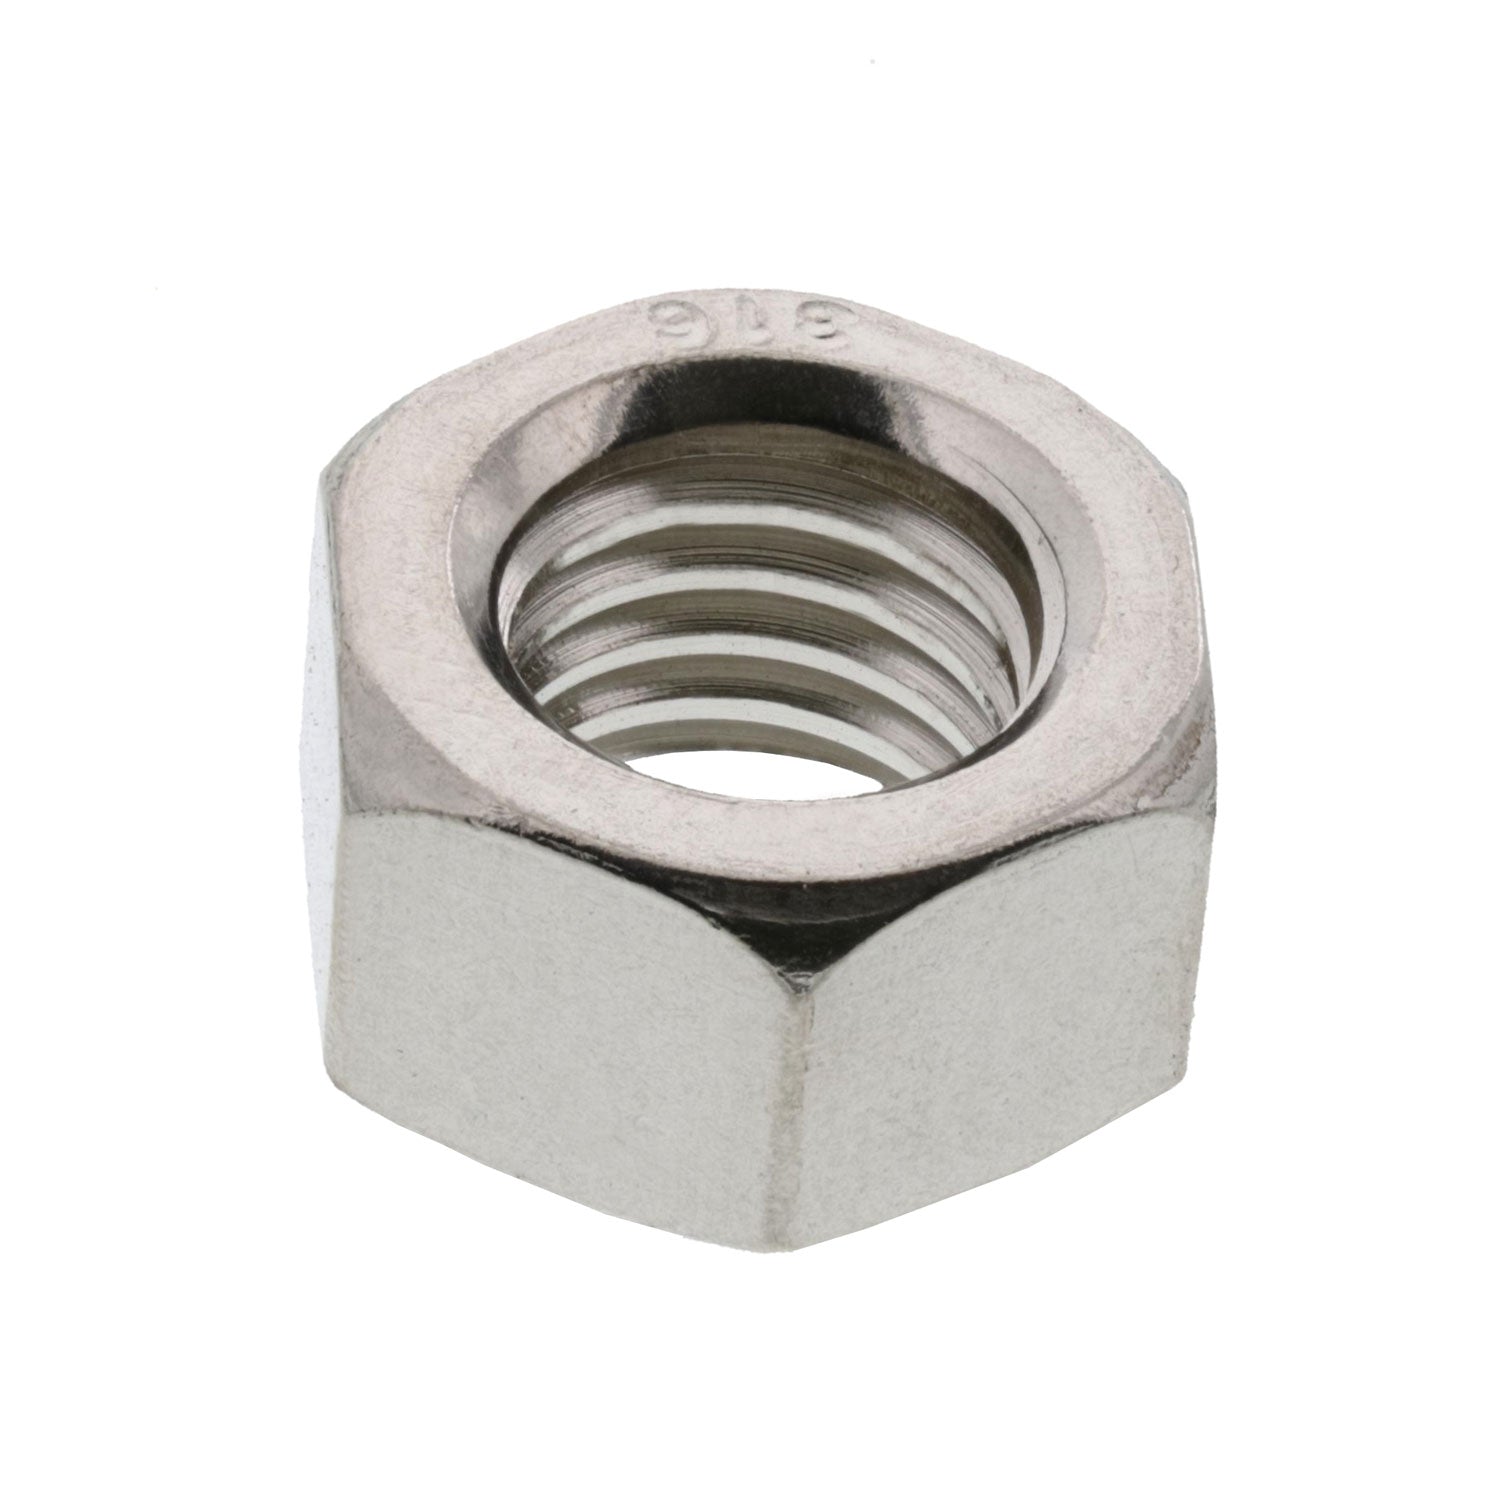 Stainless Hex Nuts - UNC Right Hand